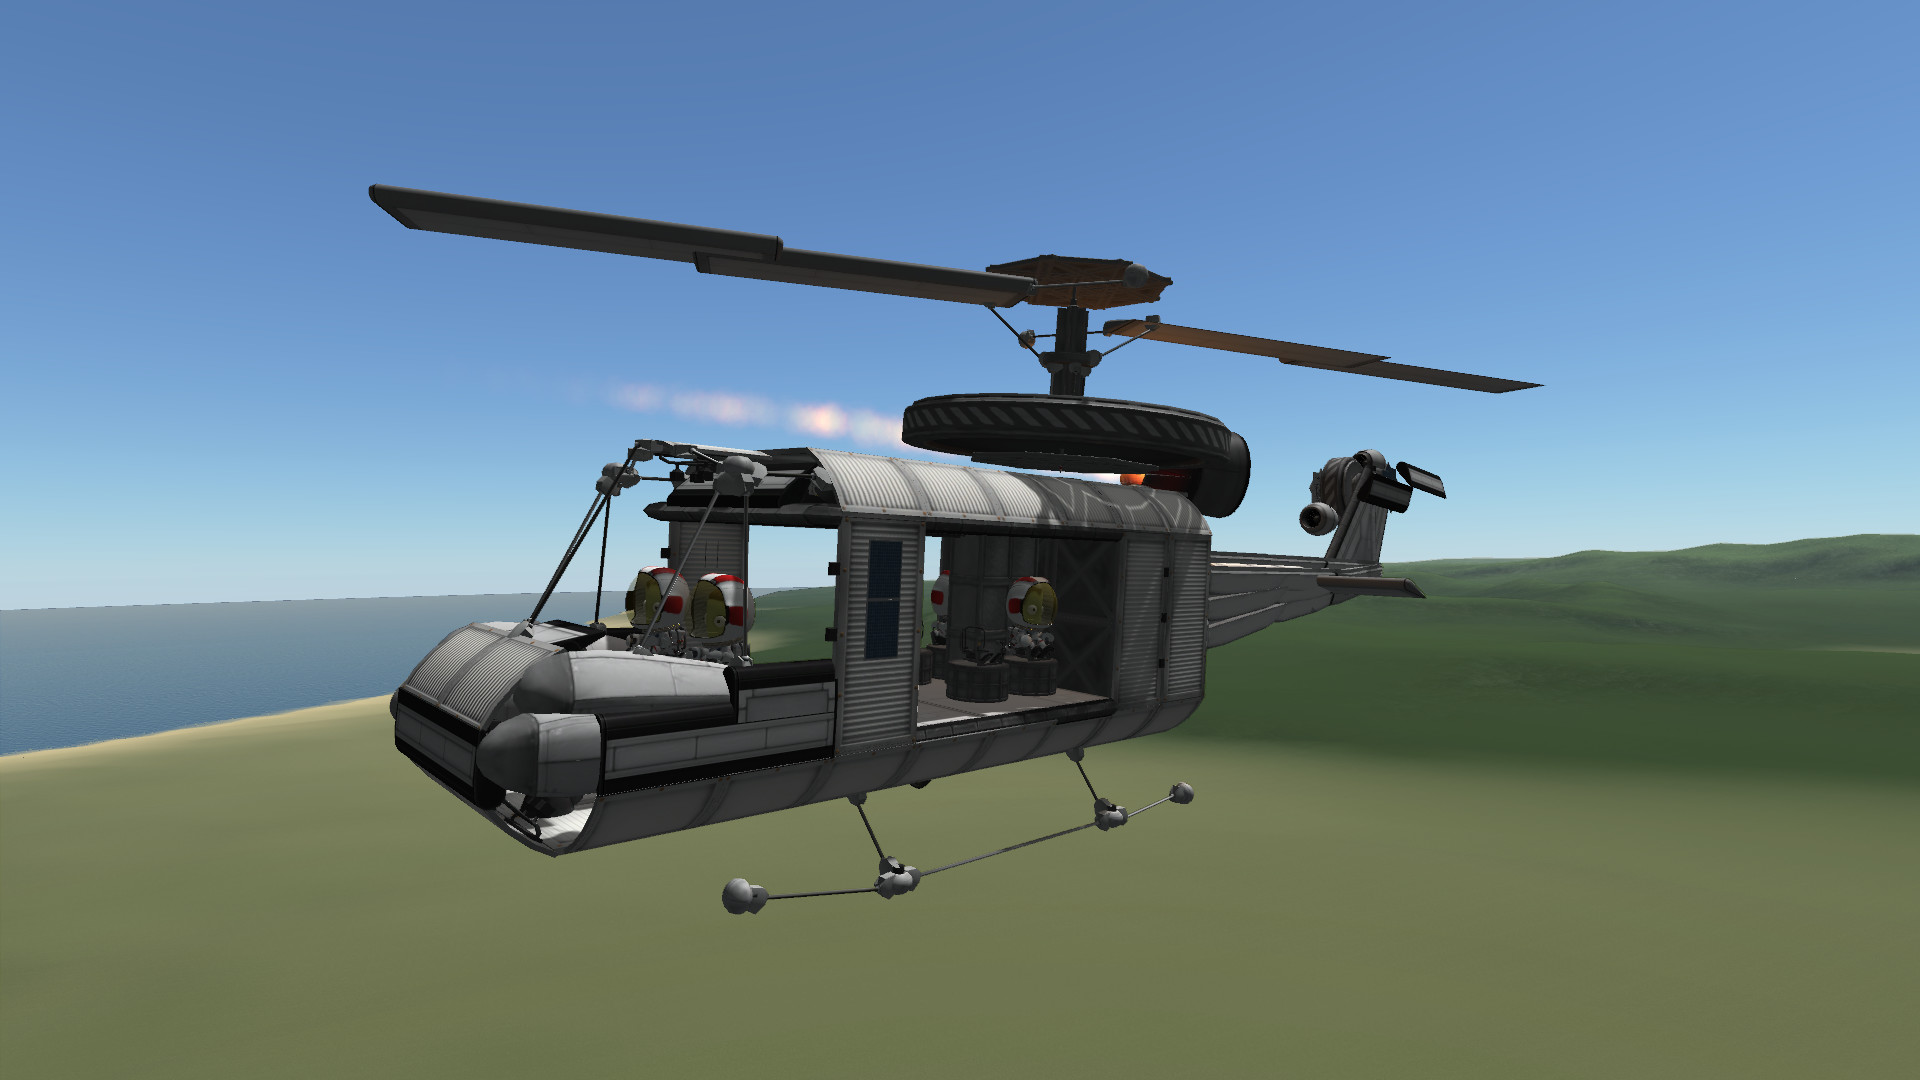 1920x1080 The Huey is the iconic helicopter from the Vietnam War. From the day I  started making KSP helicopters, I knew I'd try to make one some day, and  here it is !